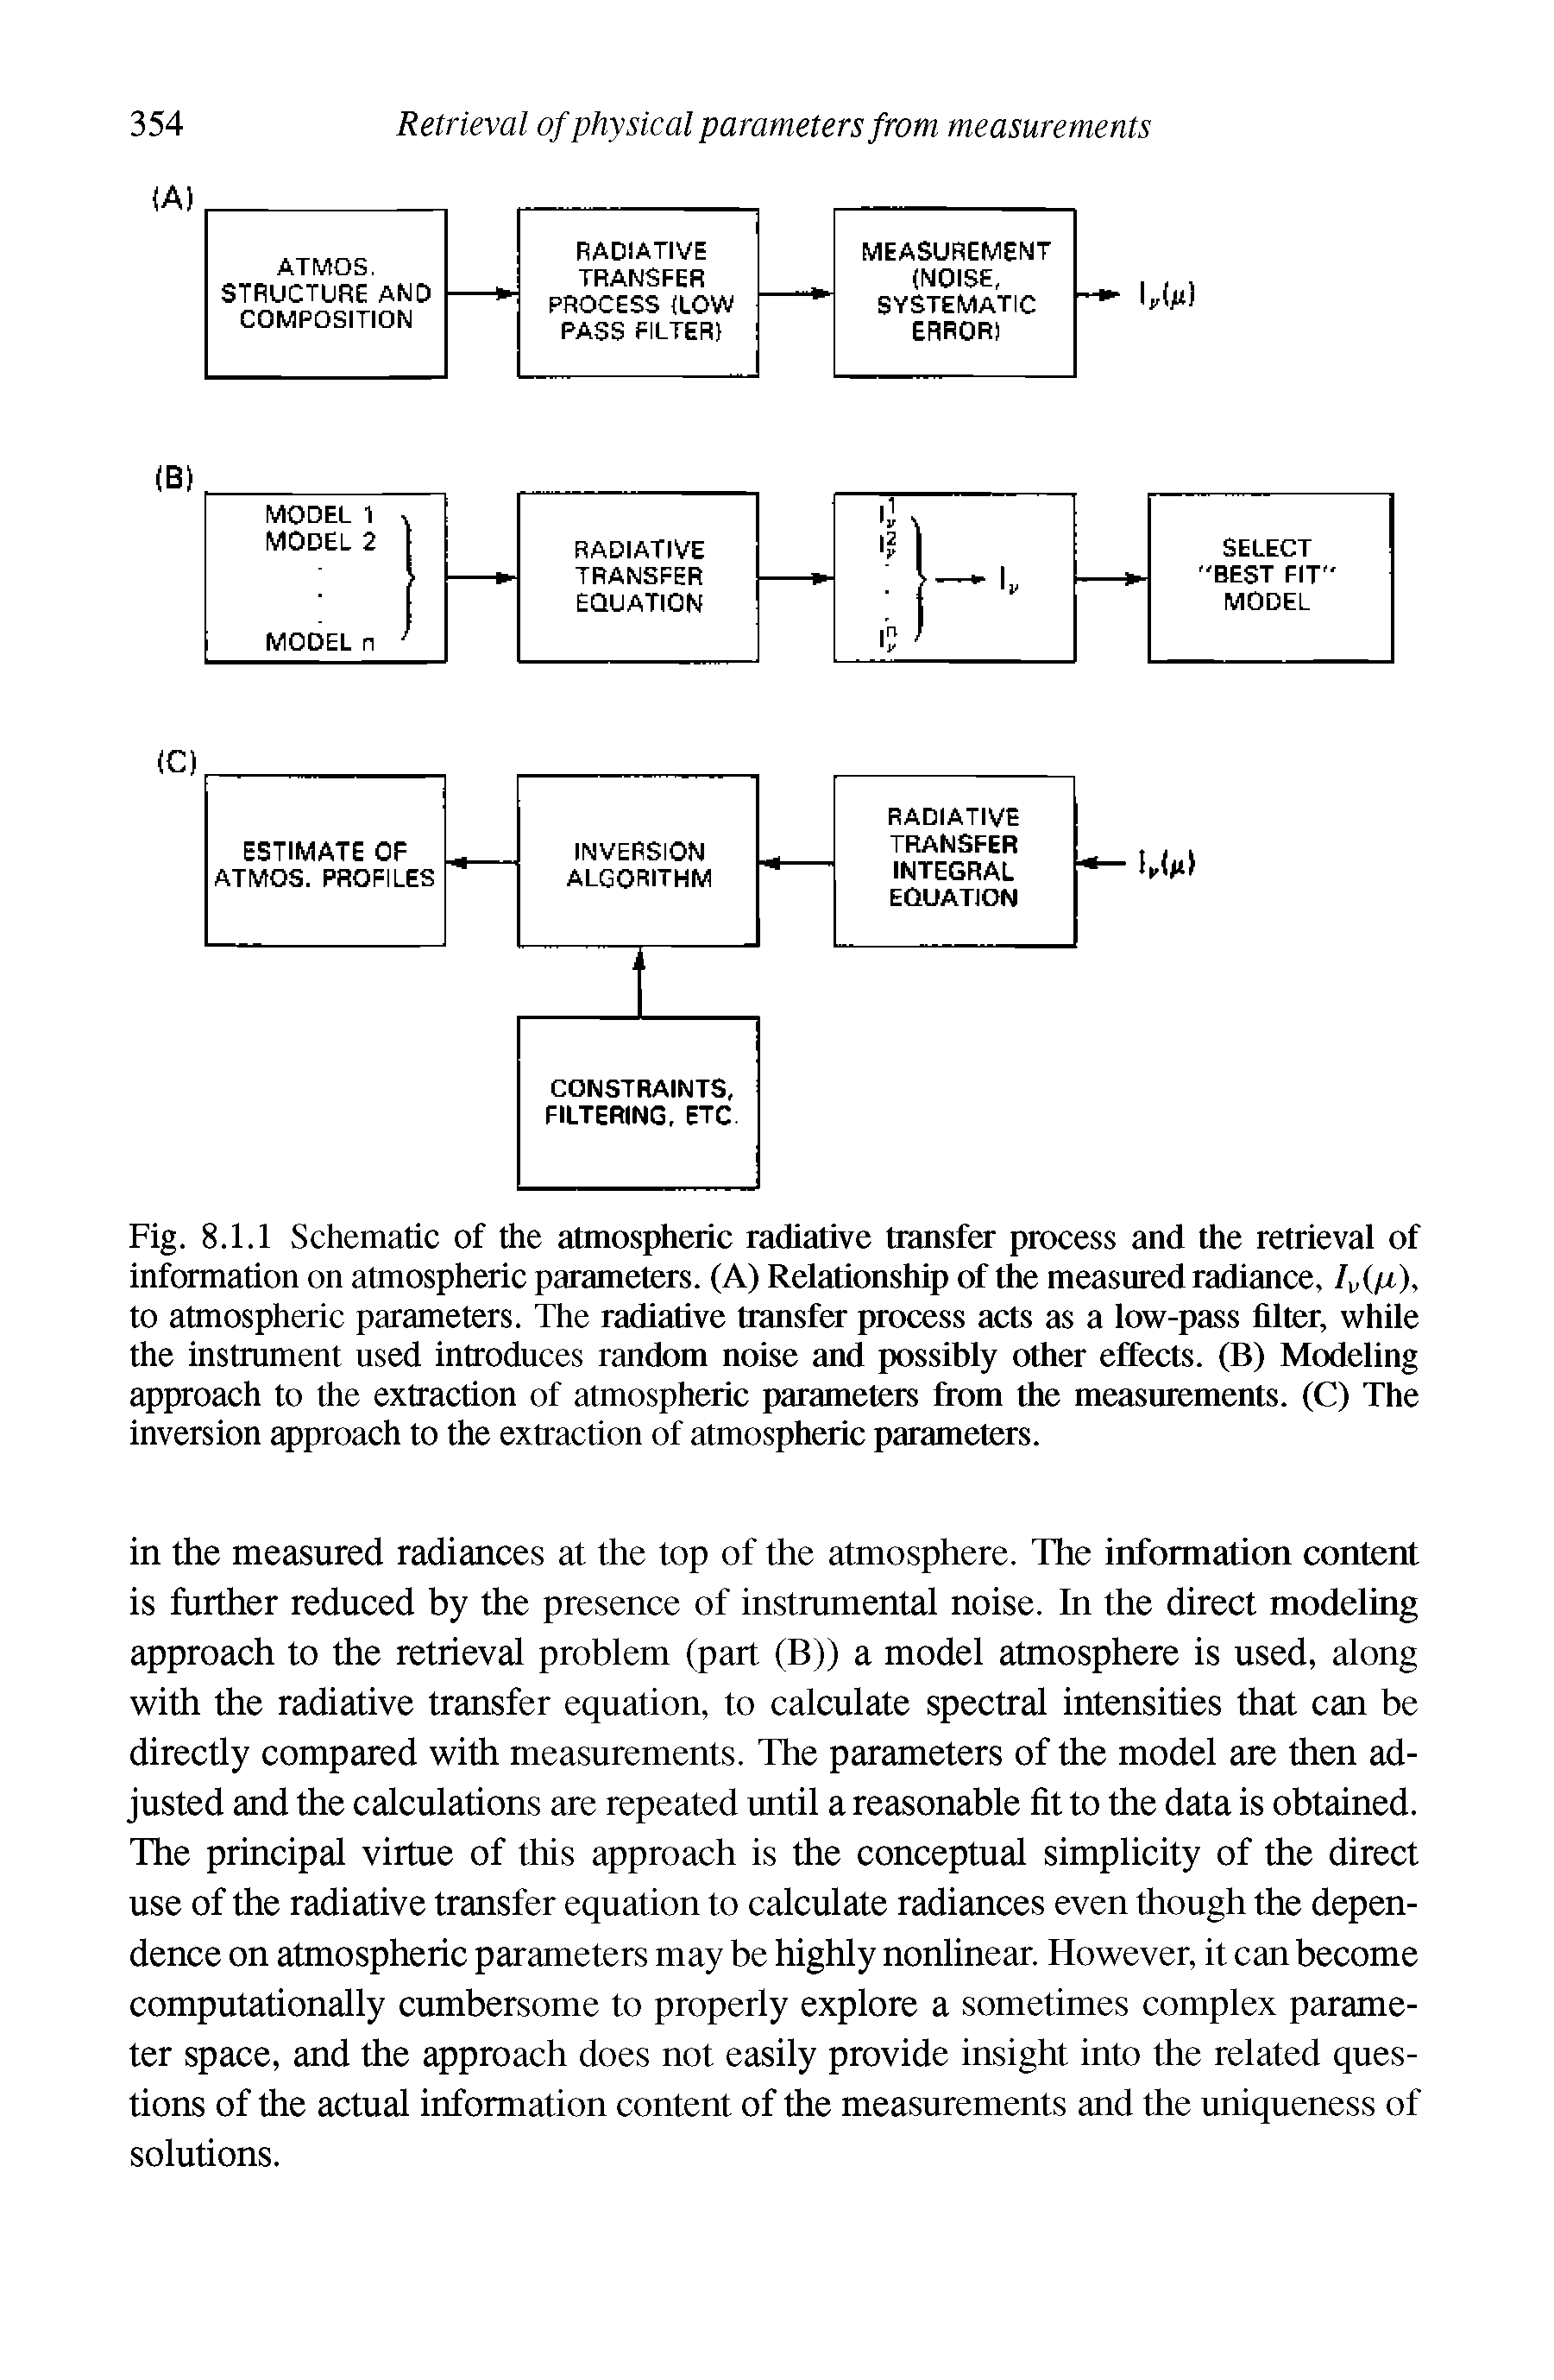 Fig. 8.1.1 Schematic of the atmospheric radiative transfer process and the retrieval of information on atmospheric parameters. (A) Relationship of the measured radiance, Iv(fi), to atmospheric parameters. The radiative transfer process acts as a low-pass filter, while the instrument used introduces random noise and possibly other effects. (B) Modeling approach to the extraction of atmospheric parameters from the measurements. (C) The inversion approach to the extraction of atmospheric parameters.